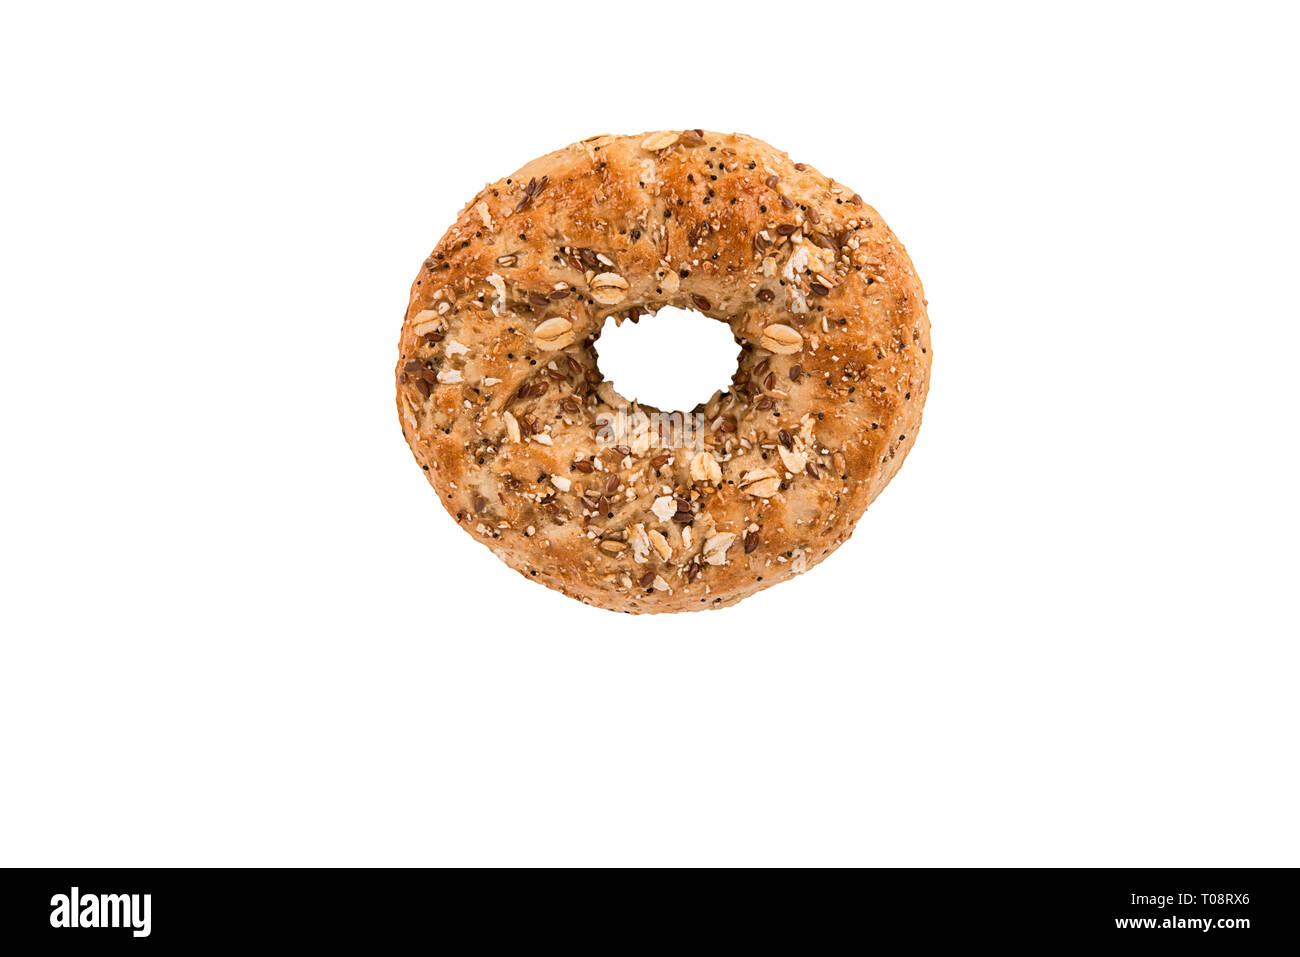 Multigrain bagel bread, directly above. Isolated on white background. Stock Photo